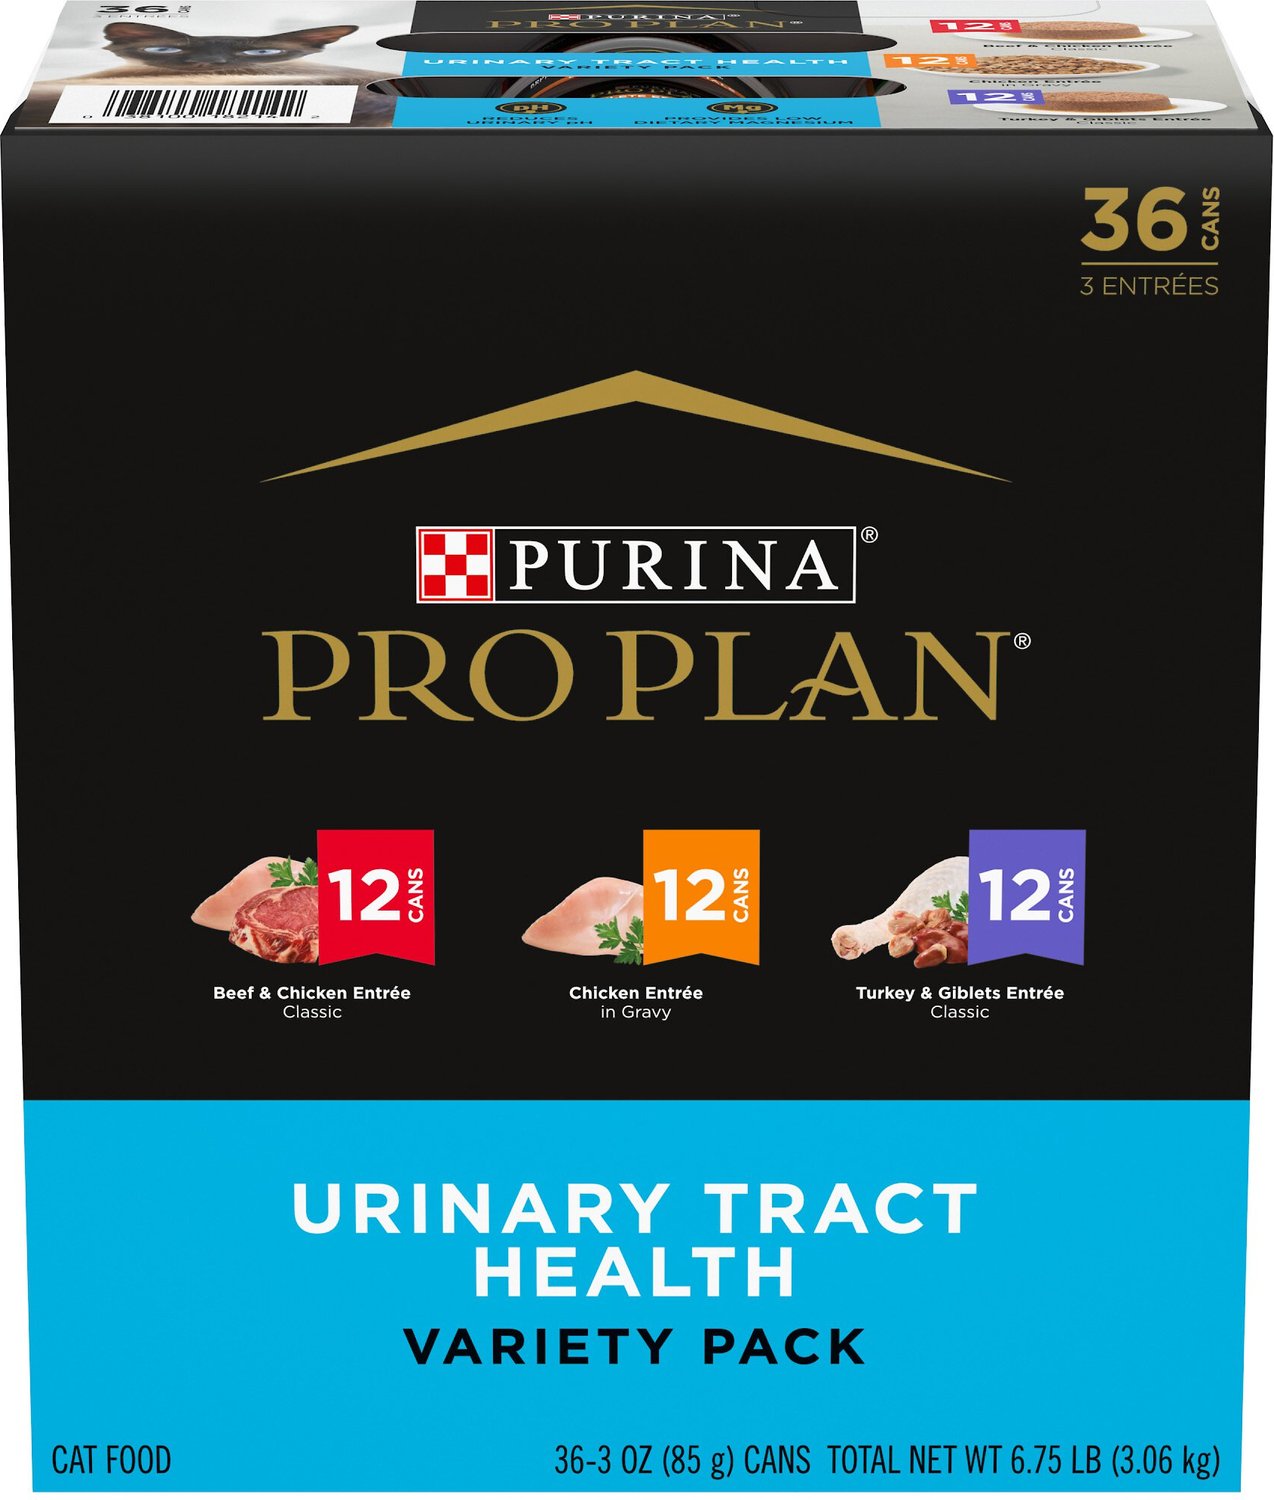 cat food for urinary tract issues